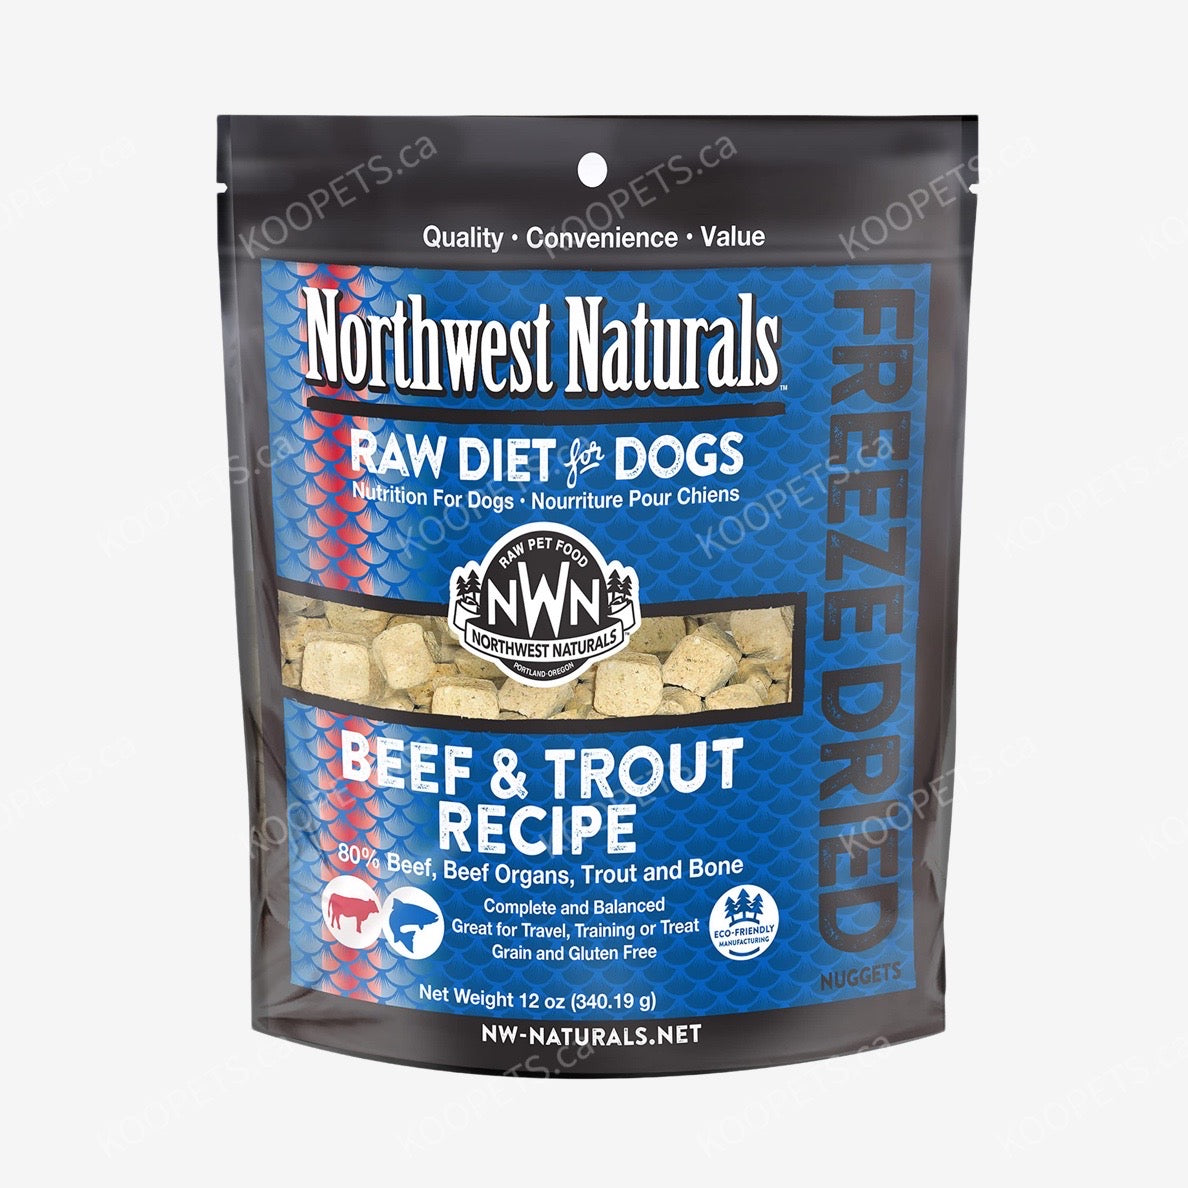 Northwest Naturals | Freeze-dried Dog Food - Nibbles